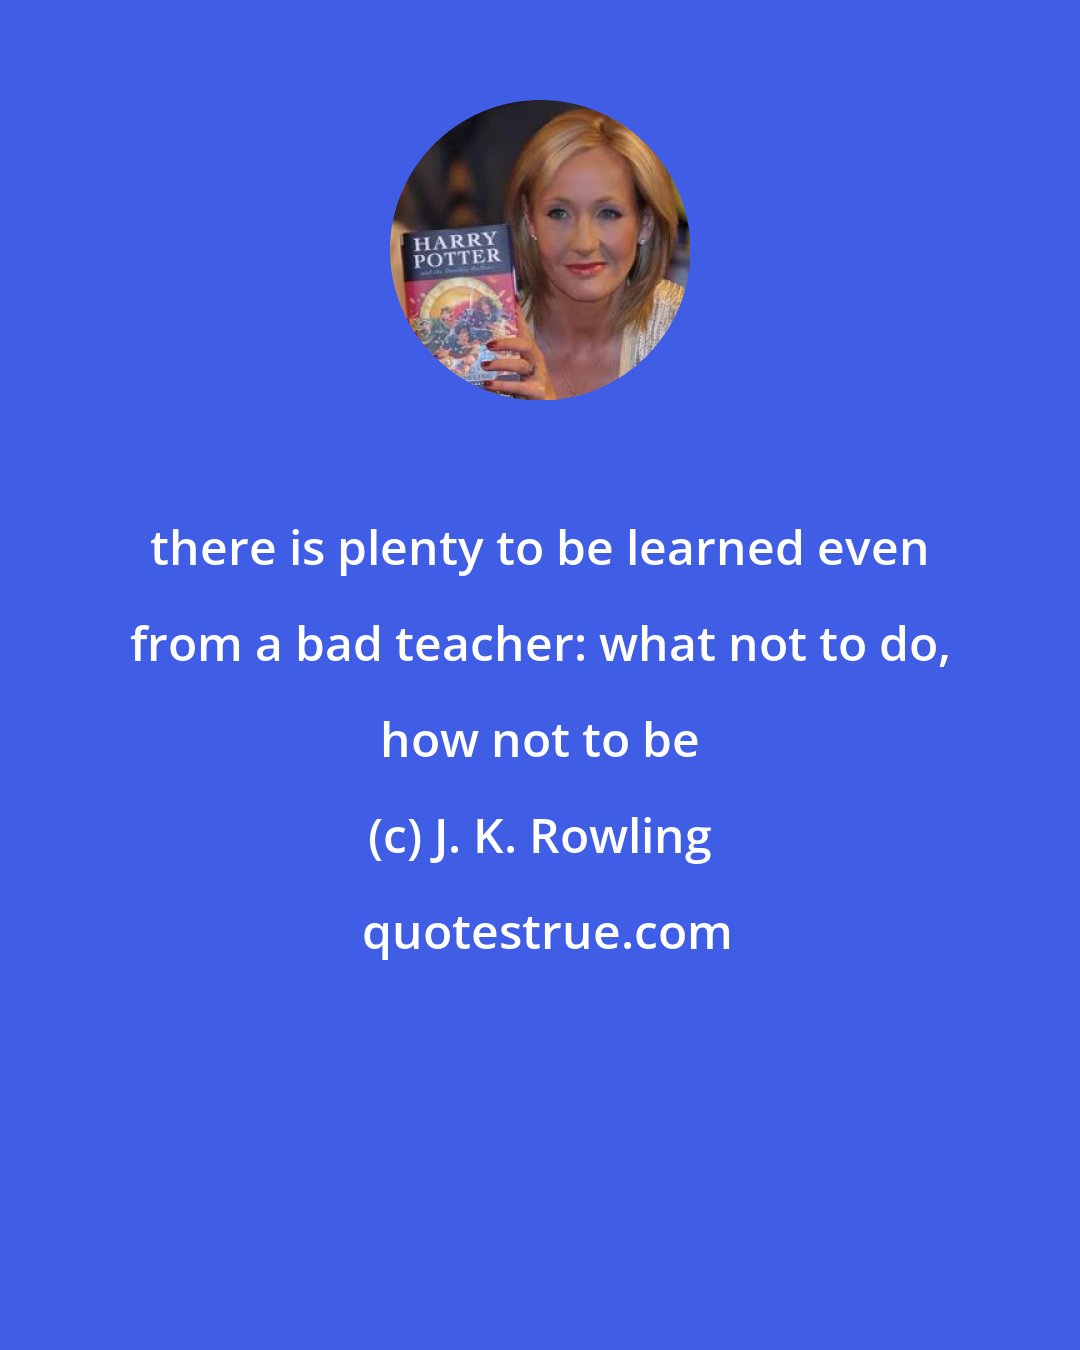 J. K. Rowling: there is plenty to be learned even from a bad teacher: what not to do, how not to be